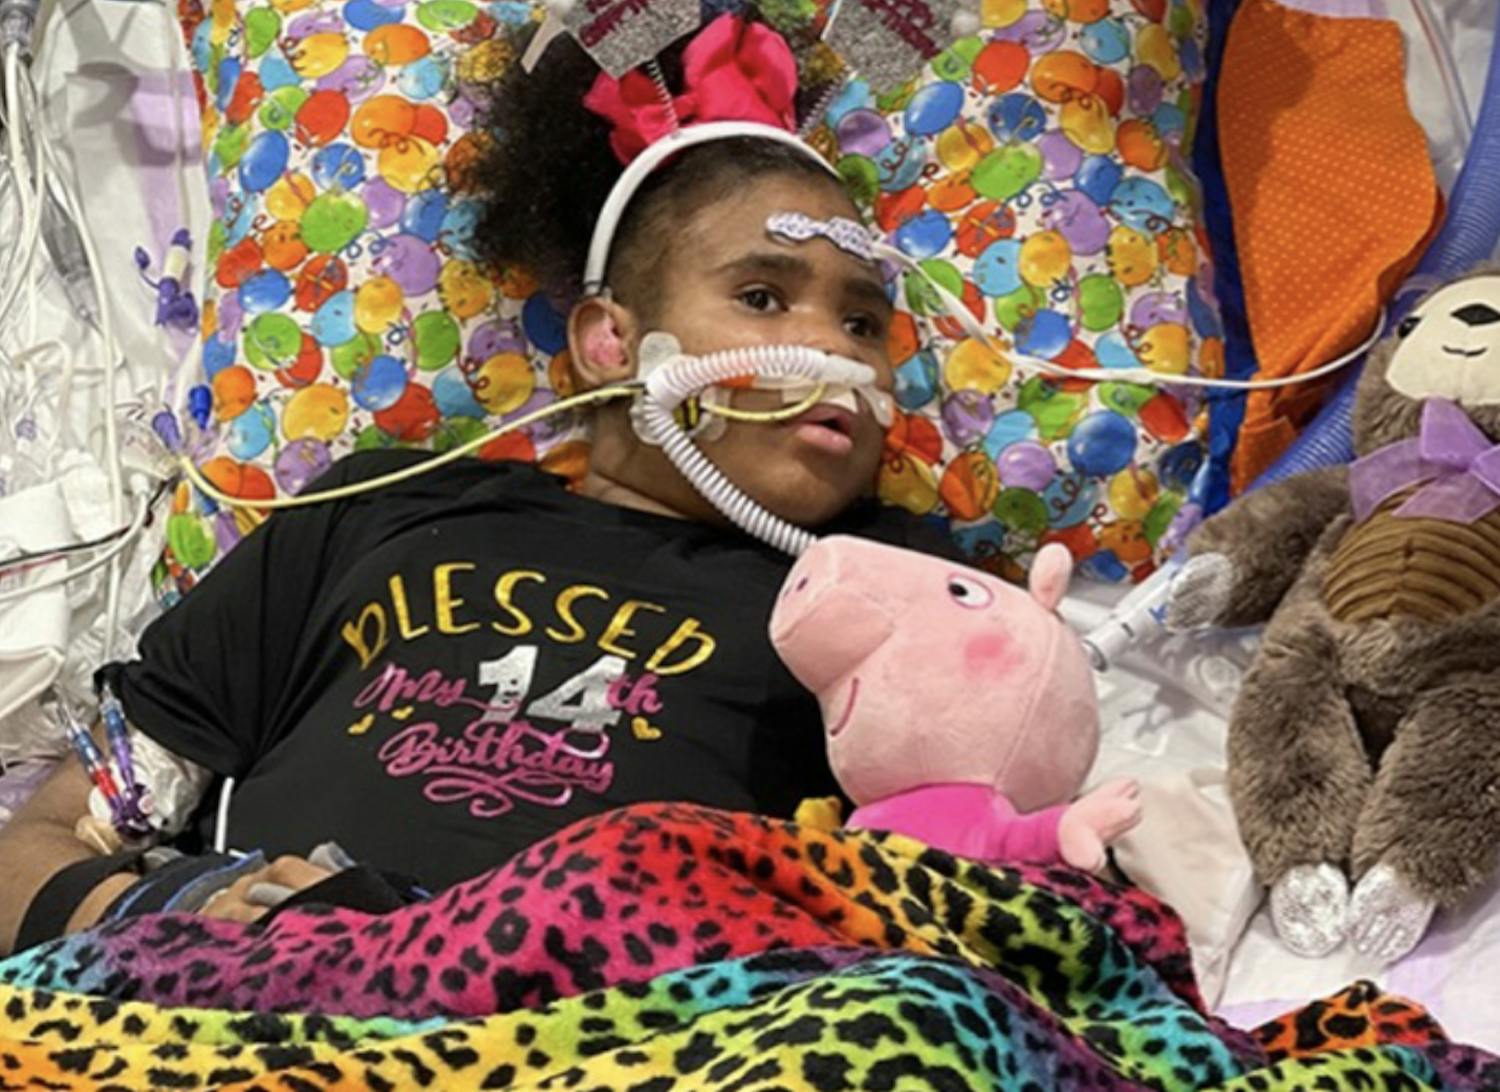 Jaynzra “Nae” Rice was hospitalized at Duke earlier this year with breathing difficulties and received a left ventricle assist device that helps the heart pump.